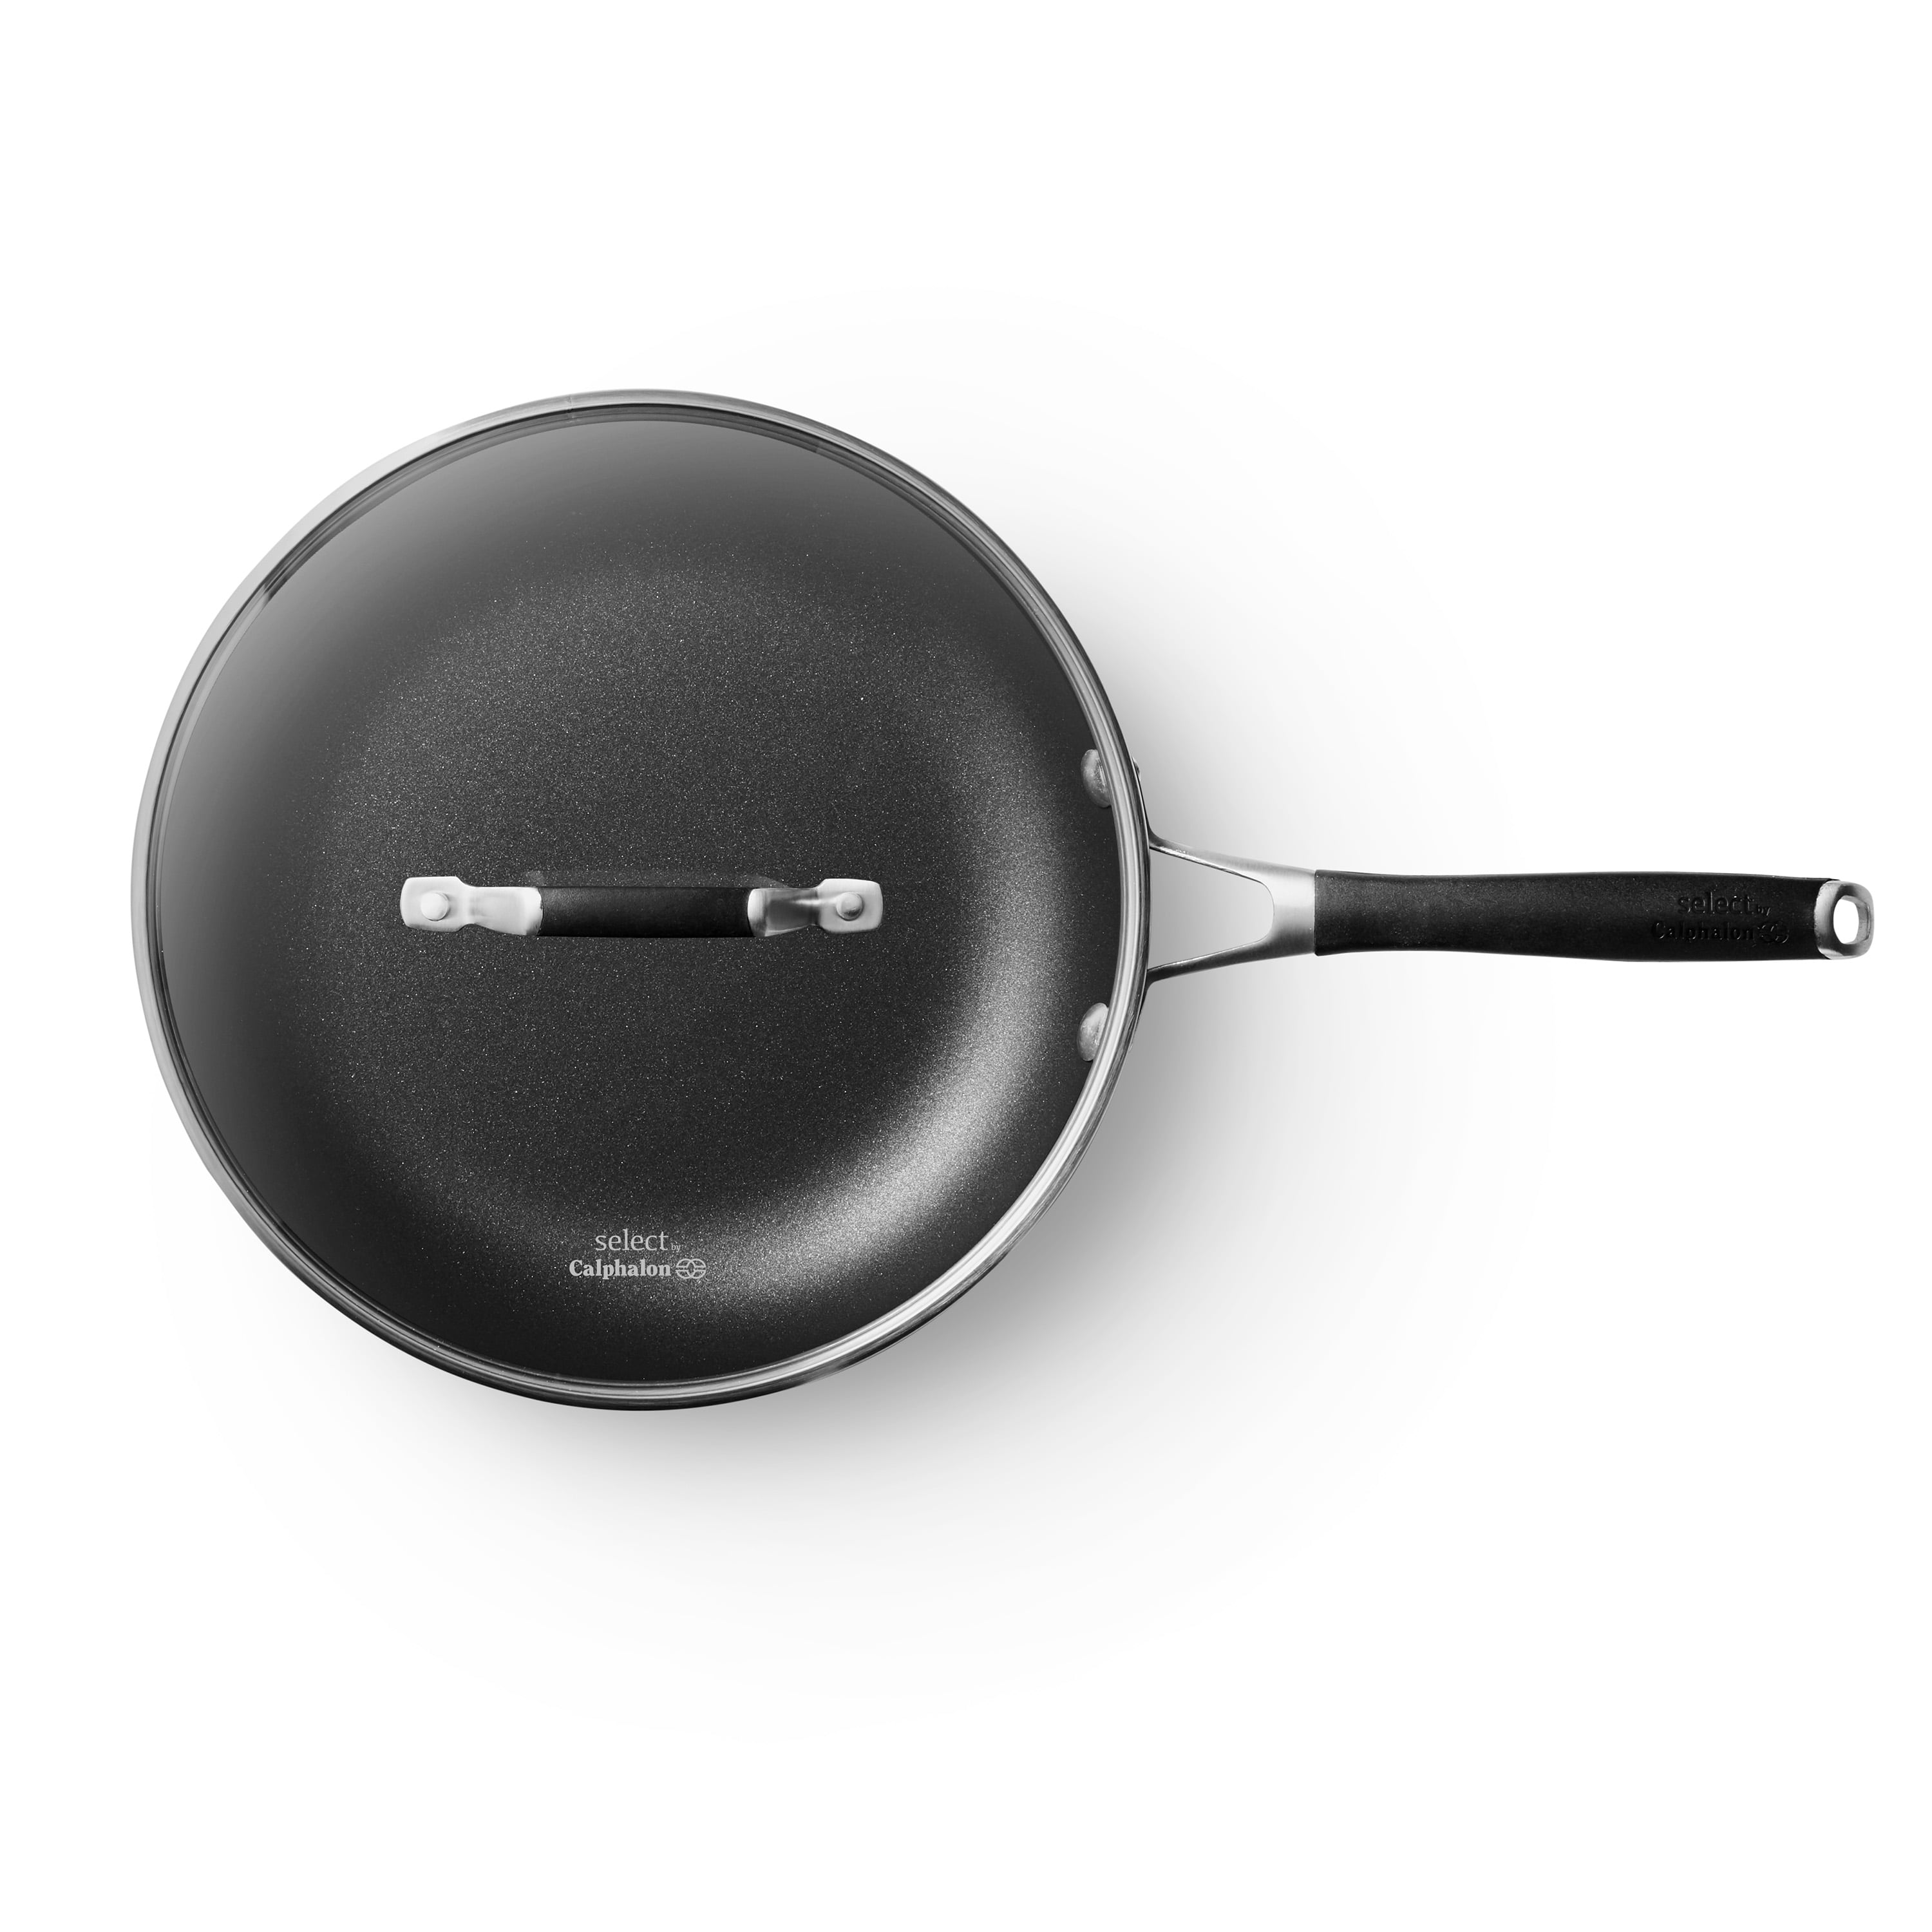 Calphalon Select Model 1390 10 inch Fry Pan Stainless Steel Skillet Riveted